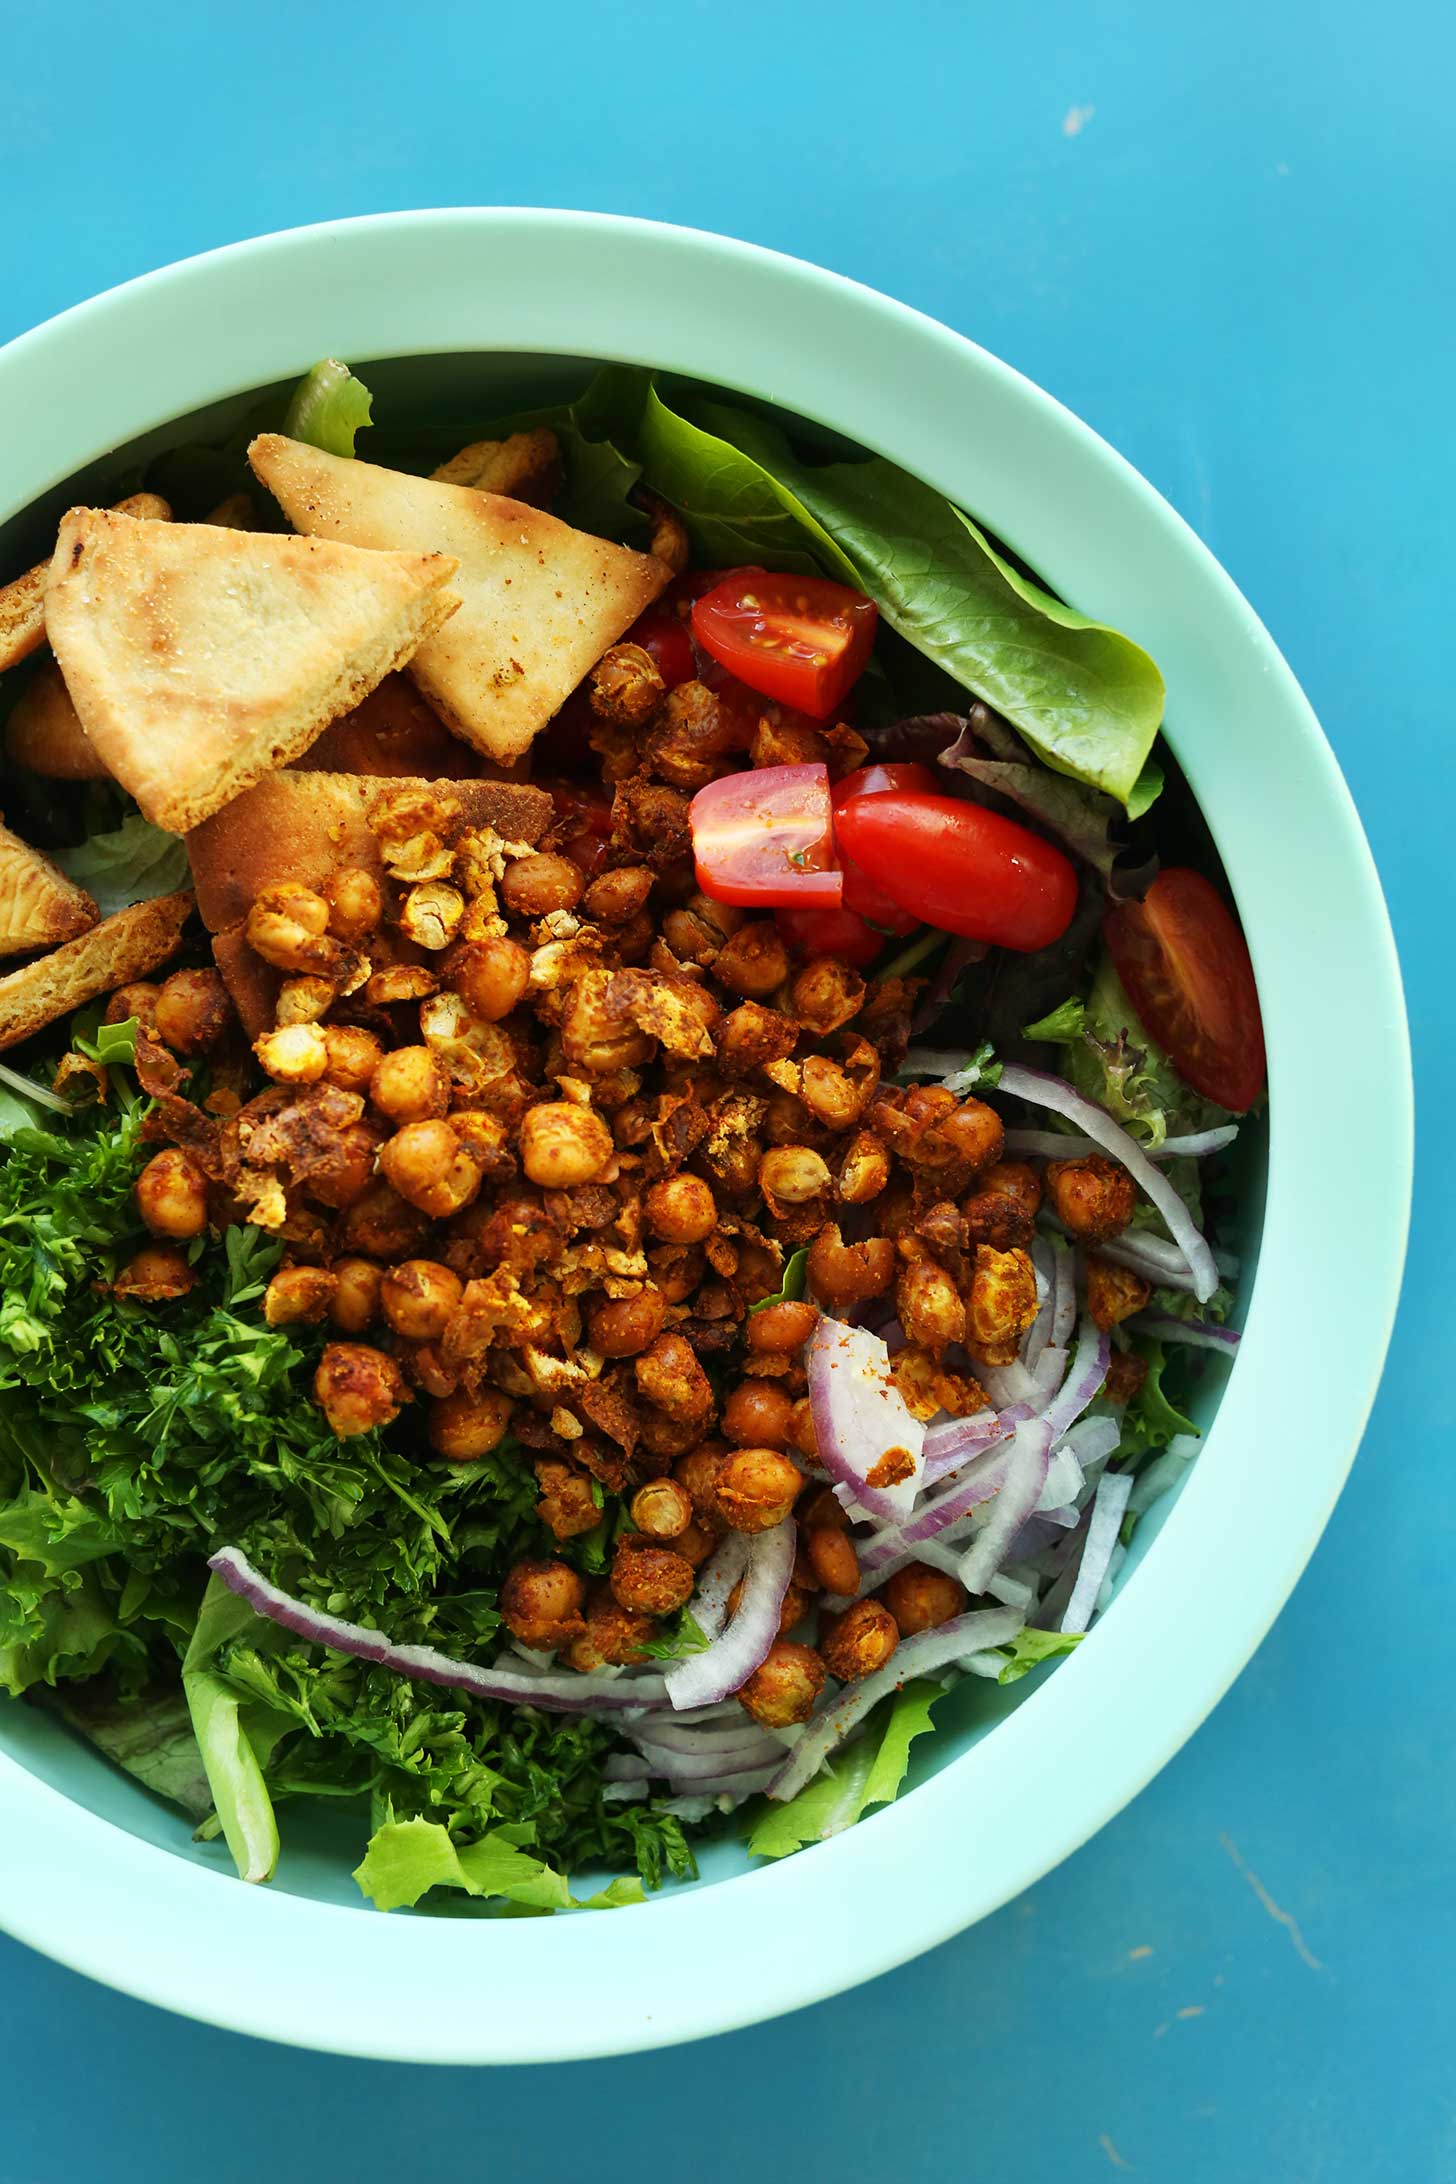 Big bowl filled with our recipe for gluten-free vegan Chickpea Shawarma Salad